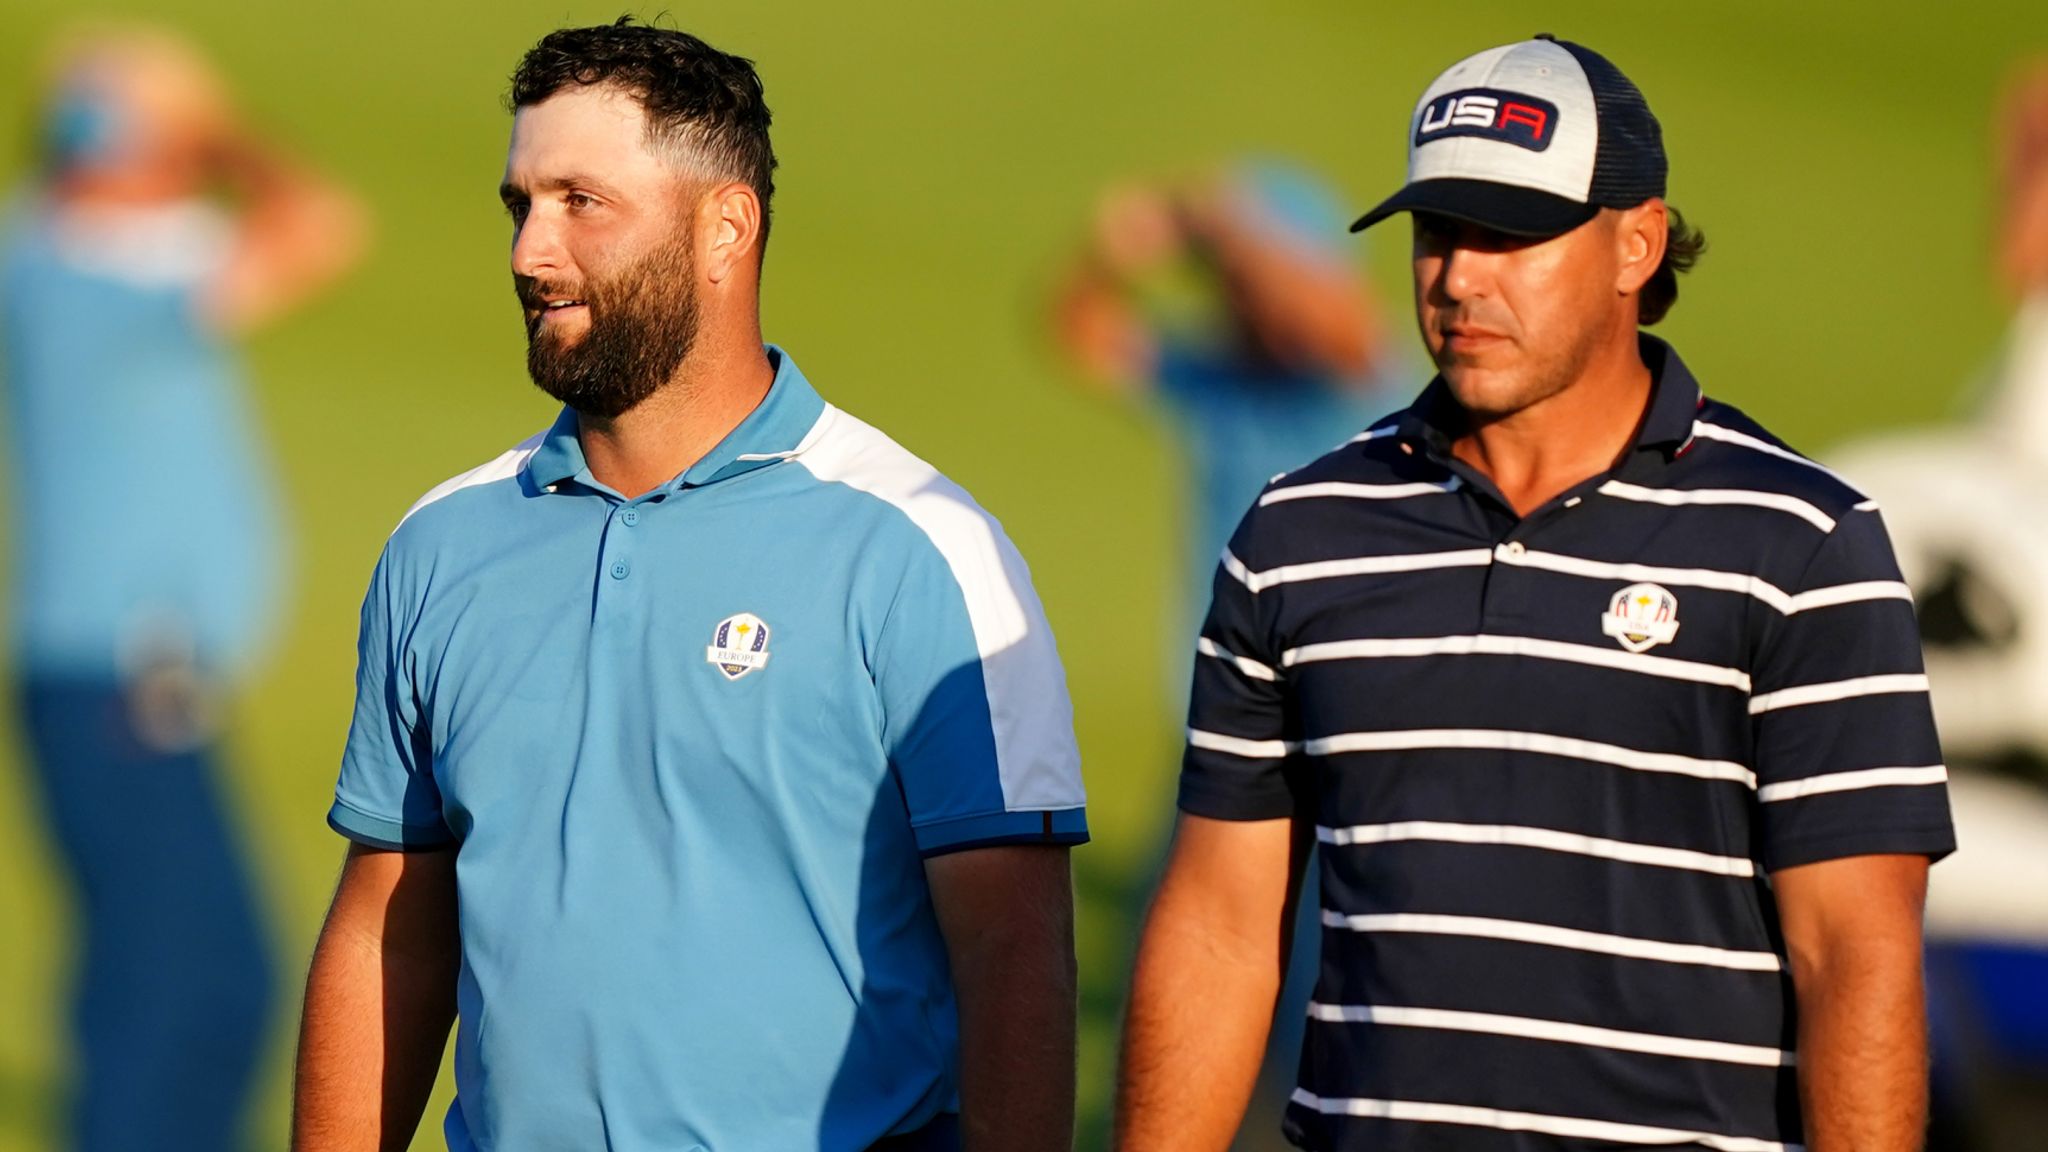 Ryder Cup Brooks Koepka hits out at child Jon Rahm after dominant opening day for Team Europe Golf News Sky Sports